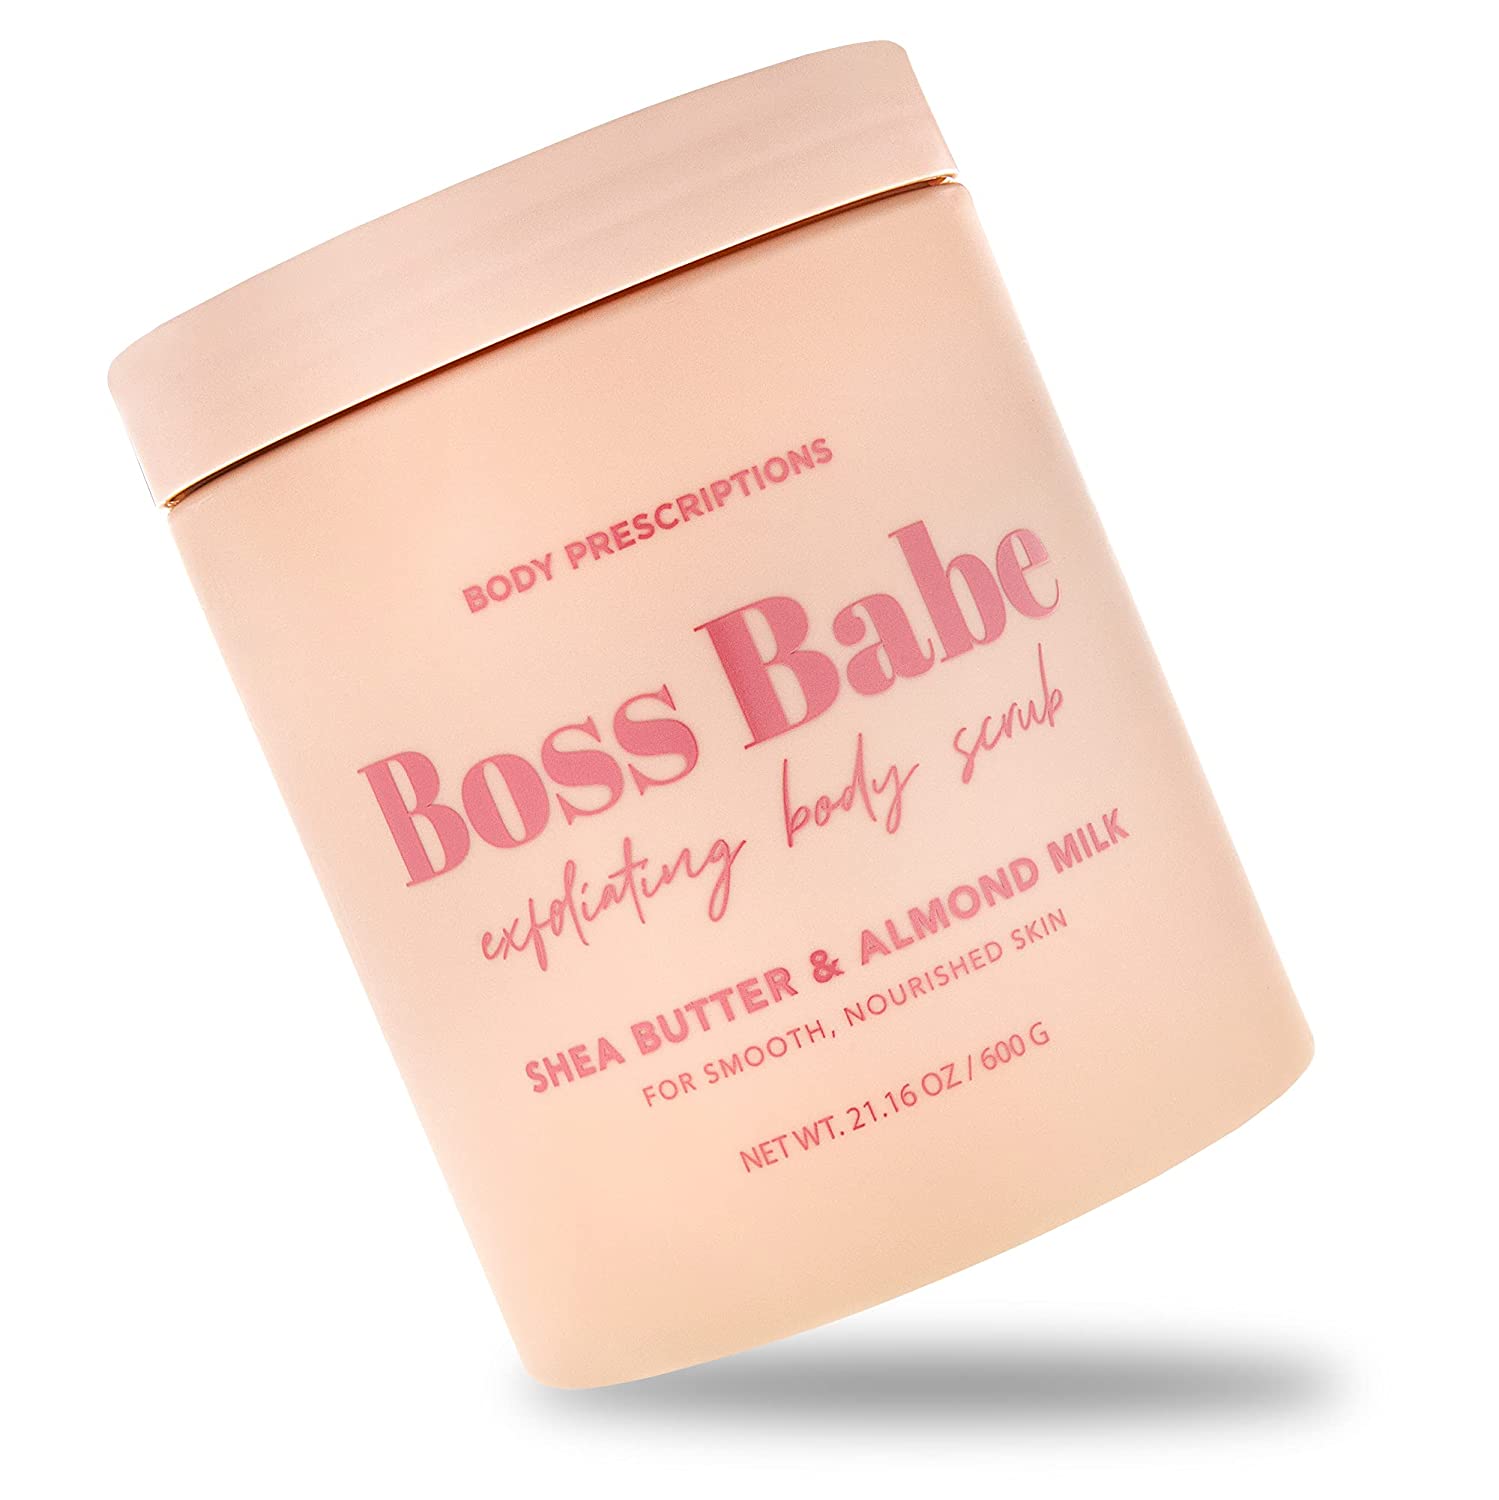 Body Prescriptions Pink “Boss Babe” Body Scrub, Exfoliating Body Wash, for Nourished and Ultra Smooth Skin, Cleanser Infused with Shea Butter and Almond Milk